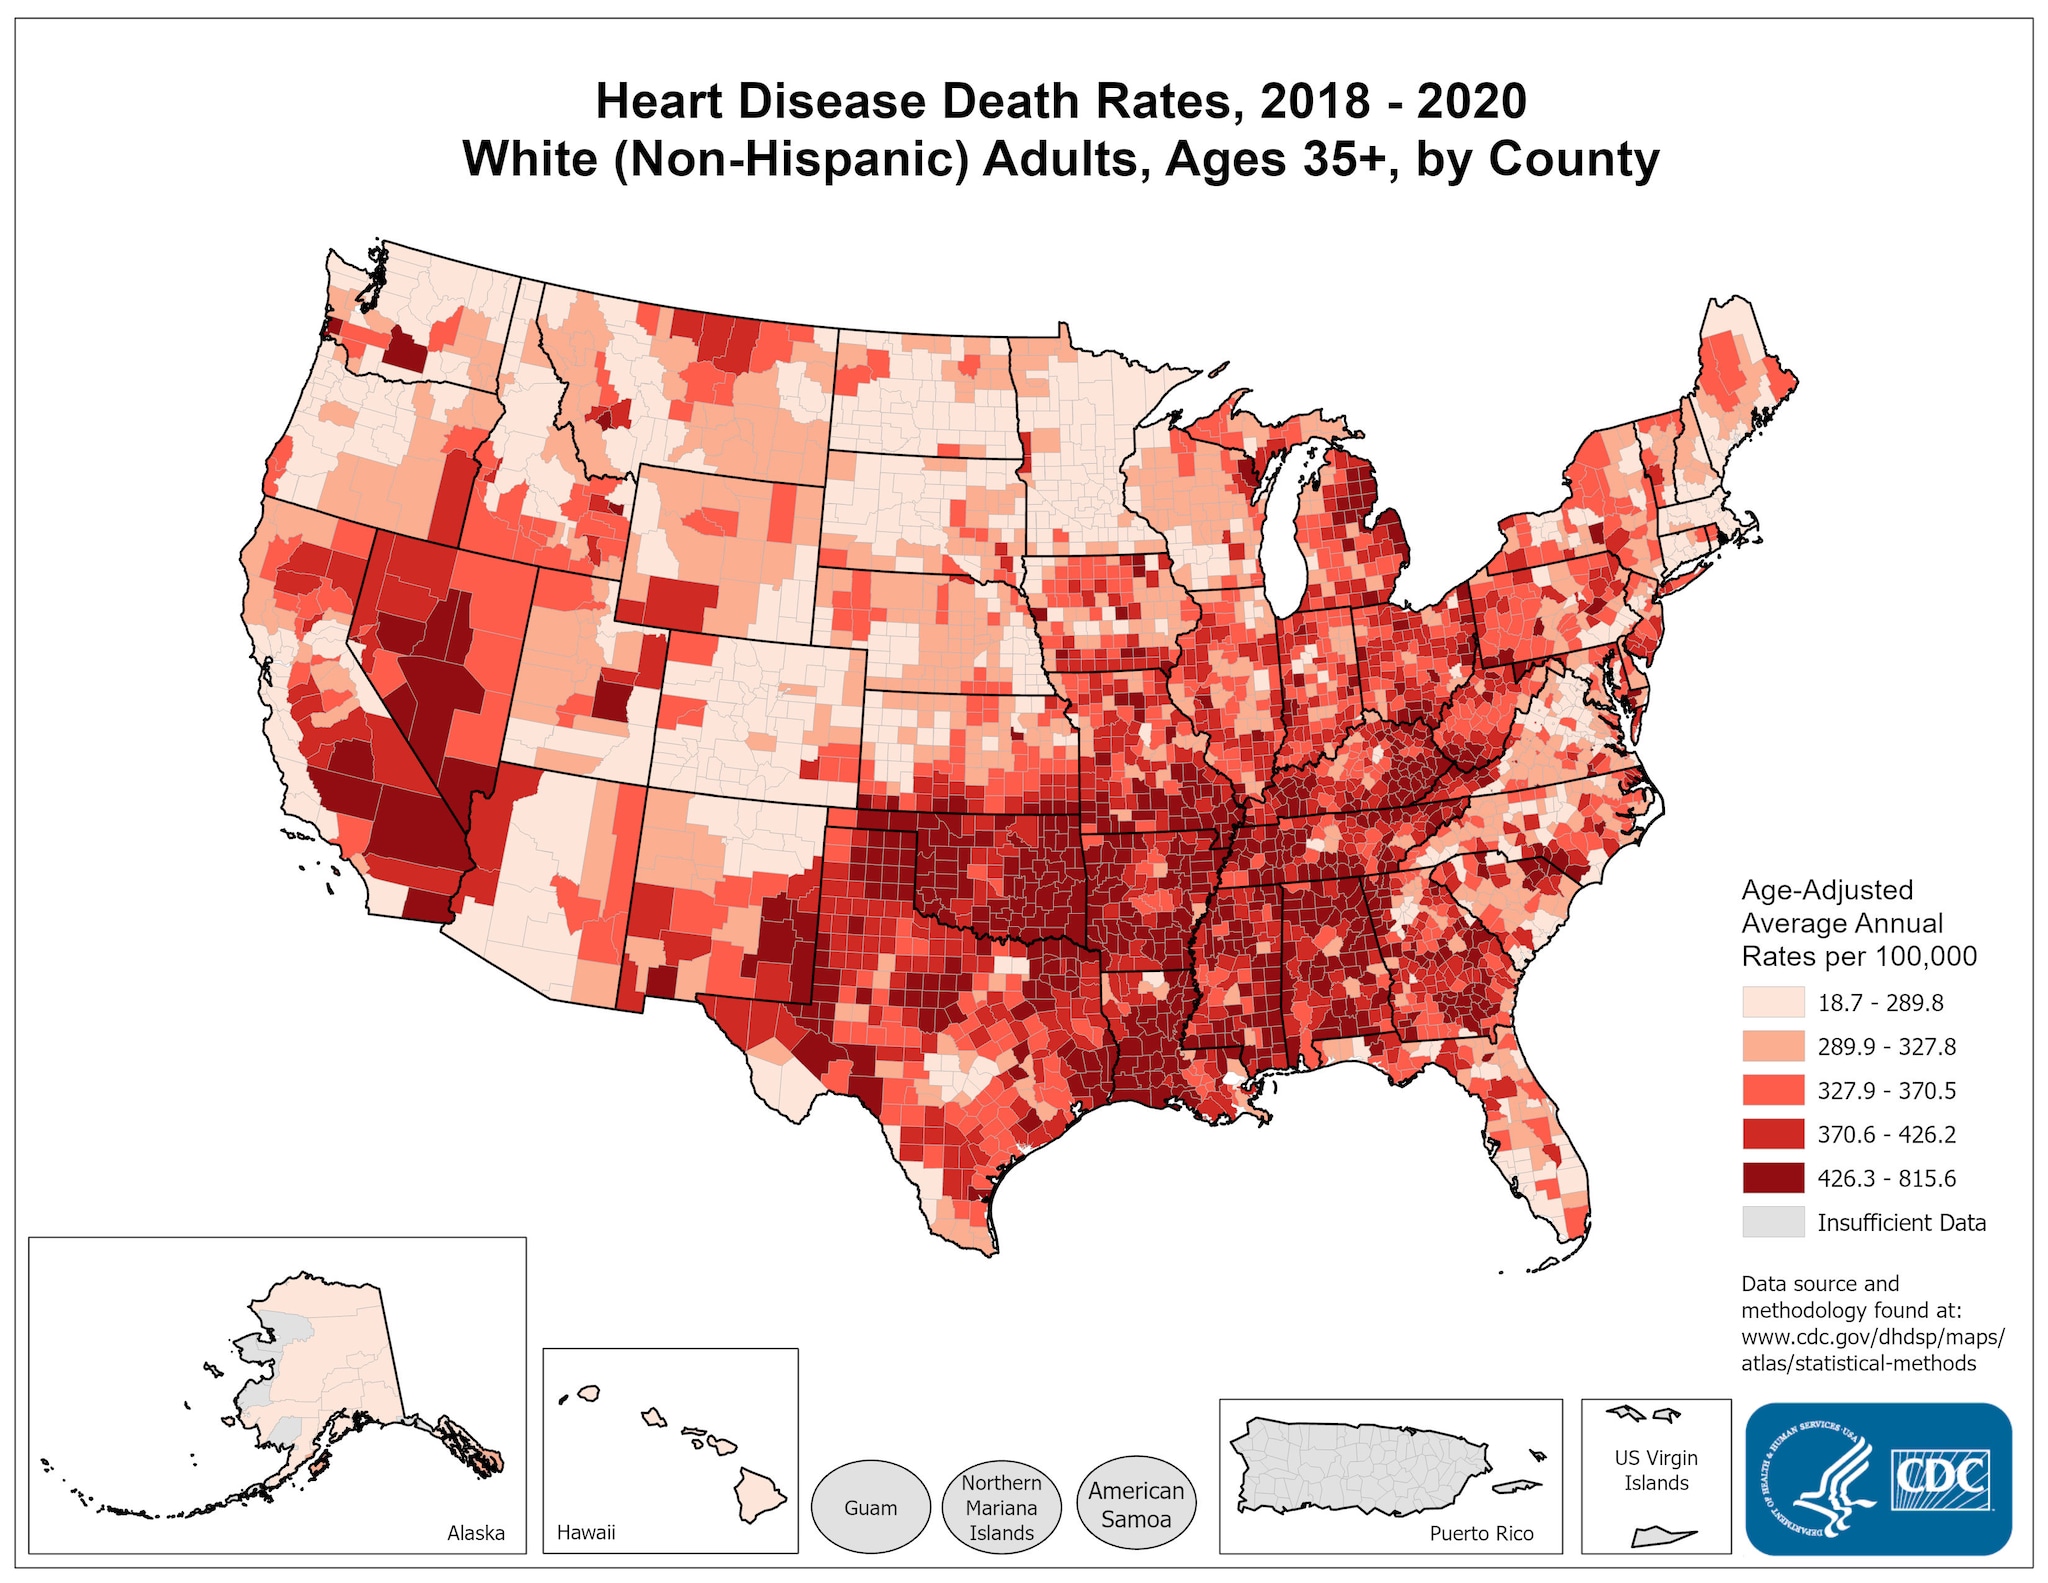 Heart Disease Death Rates for 2018 through 2020 for Whites Aged 35 Years and Older by County